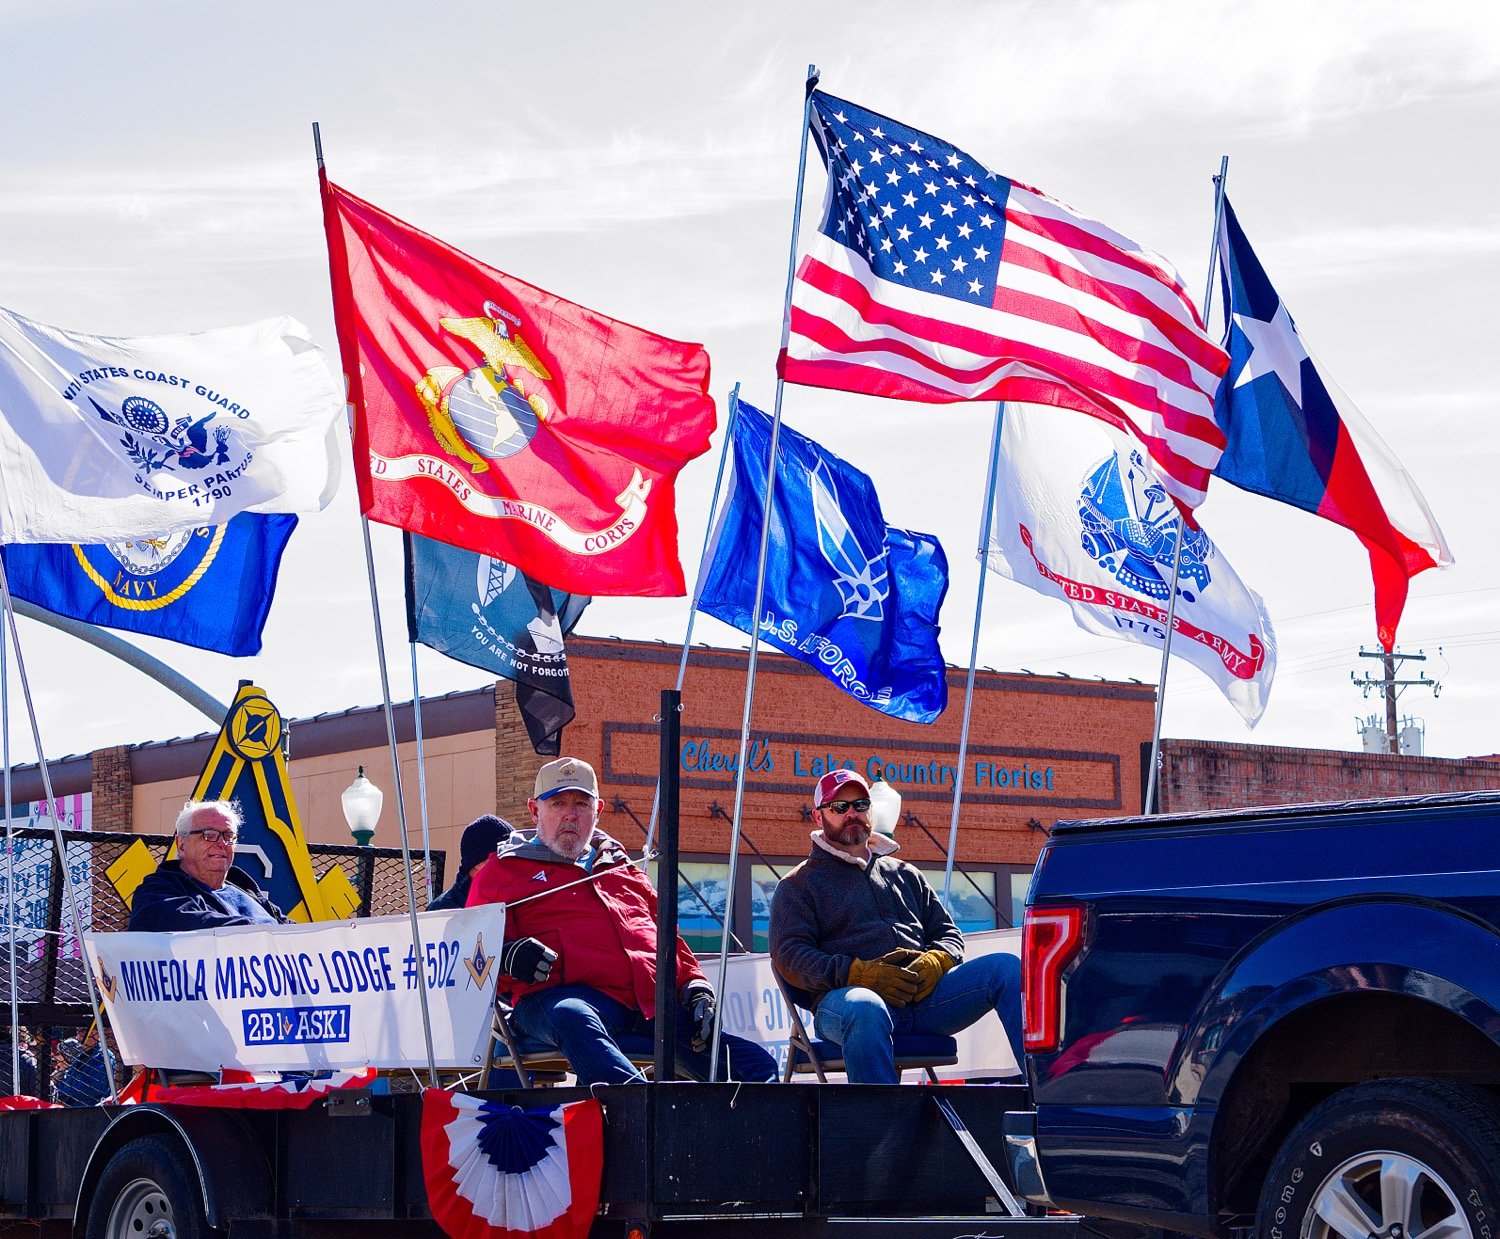 Flags representing branches of the armed forces wave from the perch of the Mineola Masonic Lodge #502 float. [view more vets]